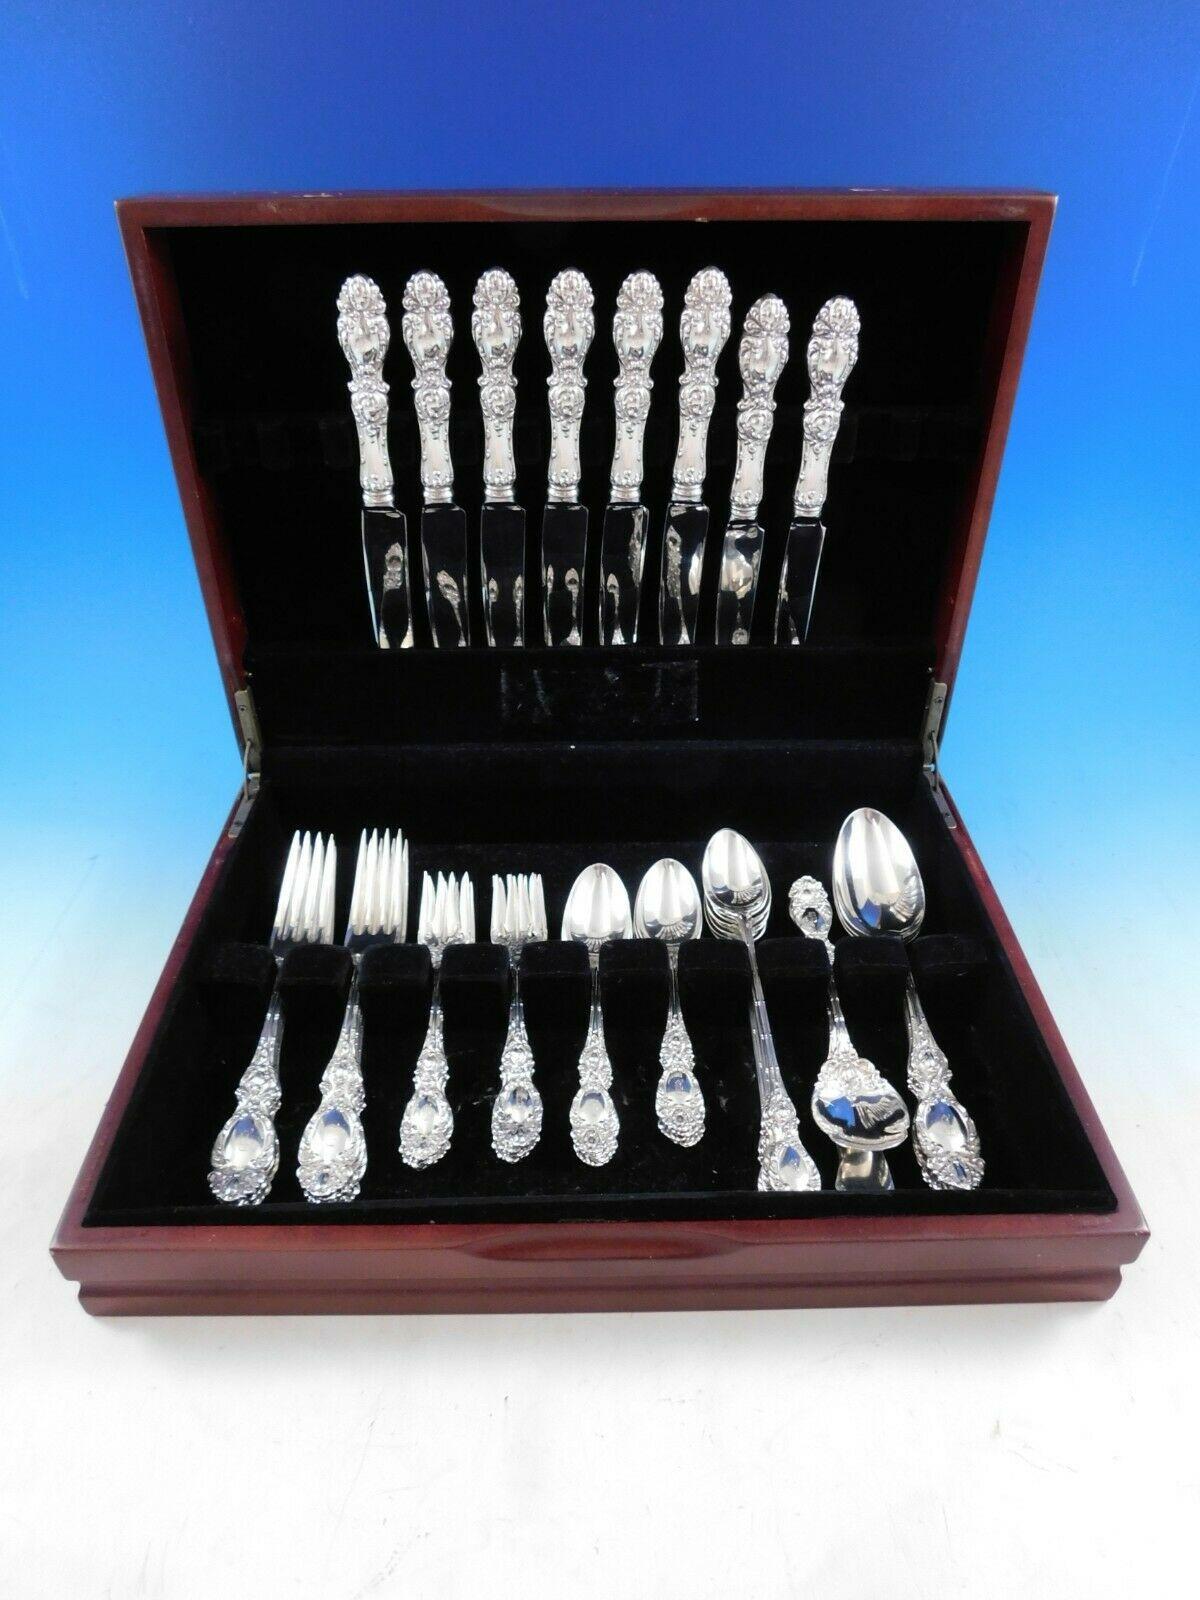 Lucerne by Wallace Sterling Silver flatware set - 45 pieces. This pattern was introduced in the year 1896 and was discontinued in the year 1996. The pieces features beautiful scroll work with salad forks and serving pieces with scroll work that